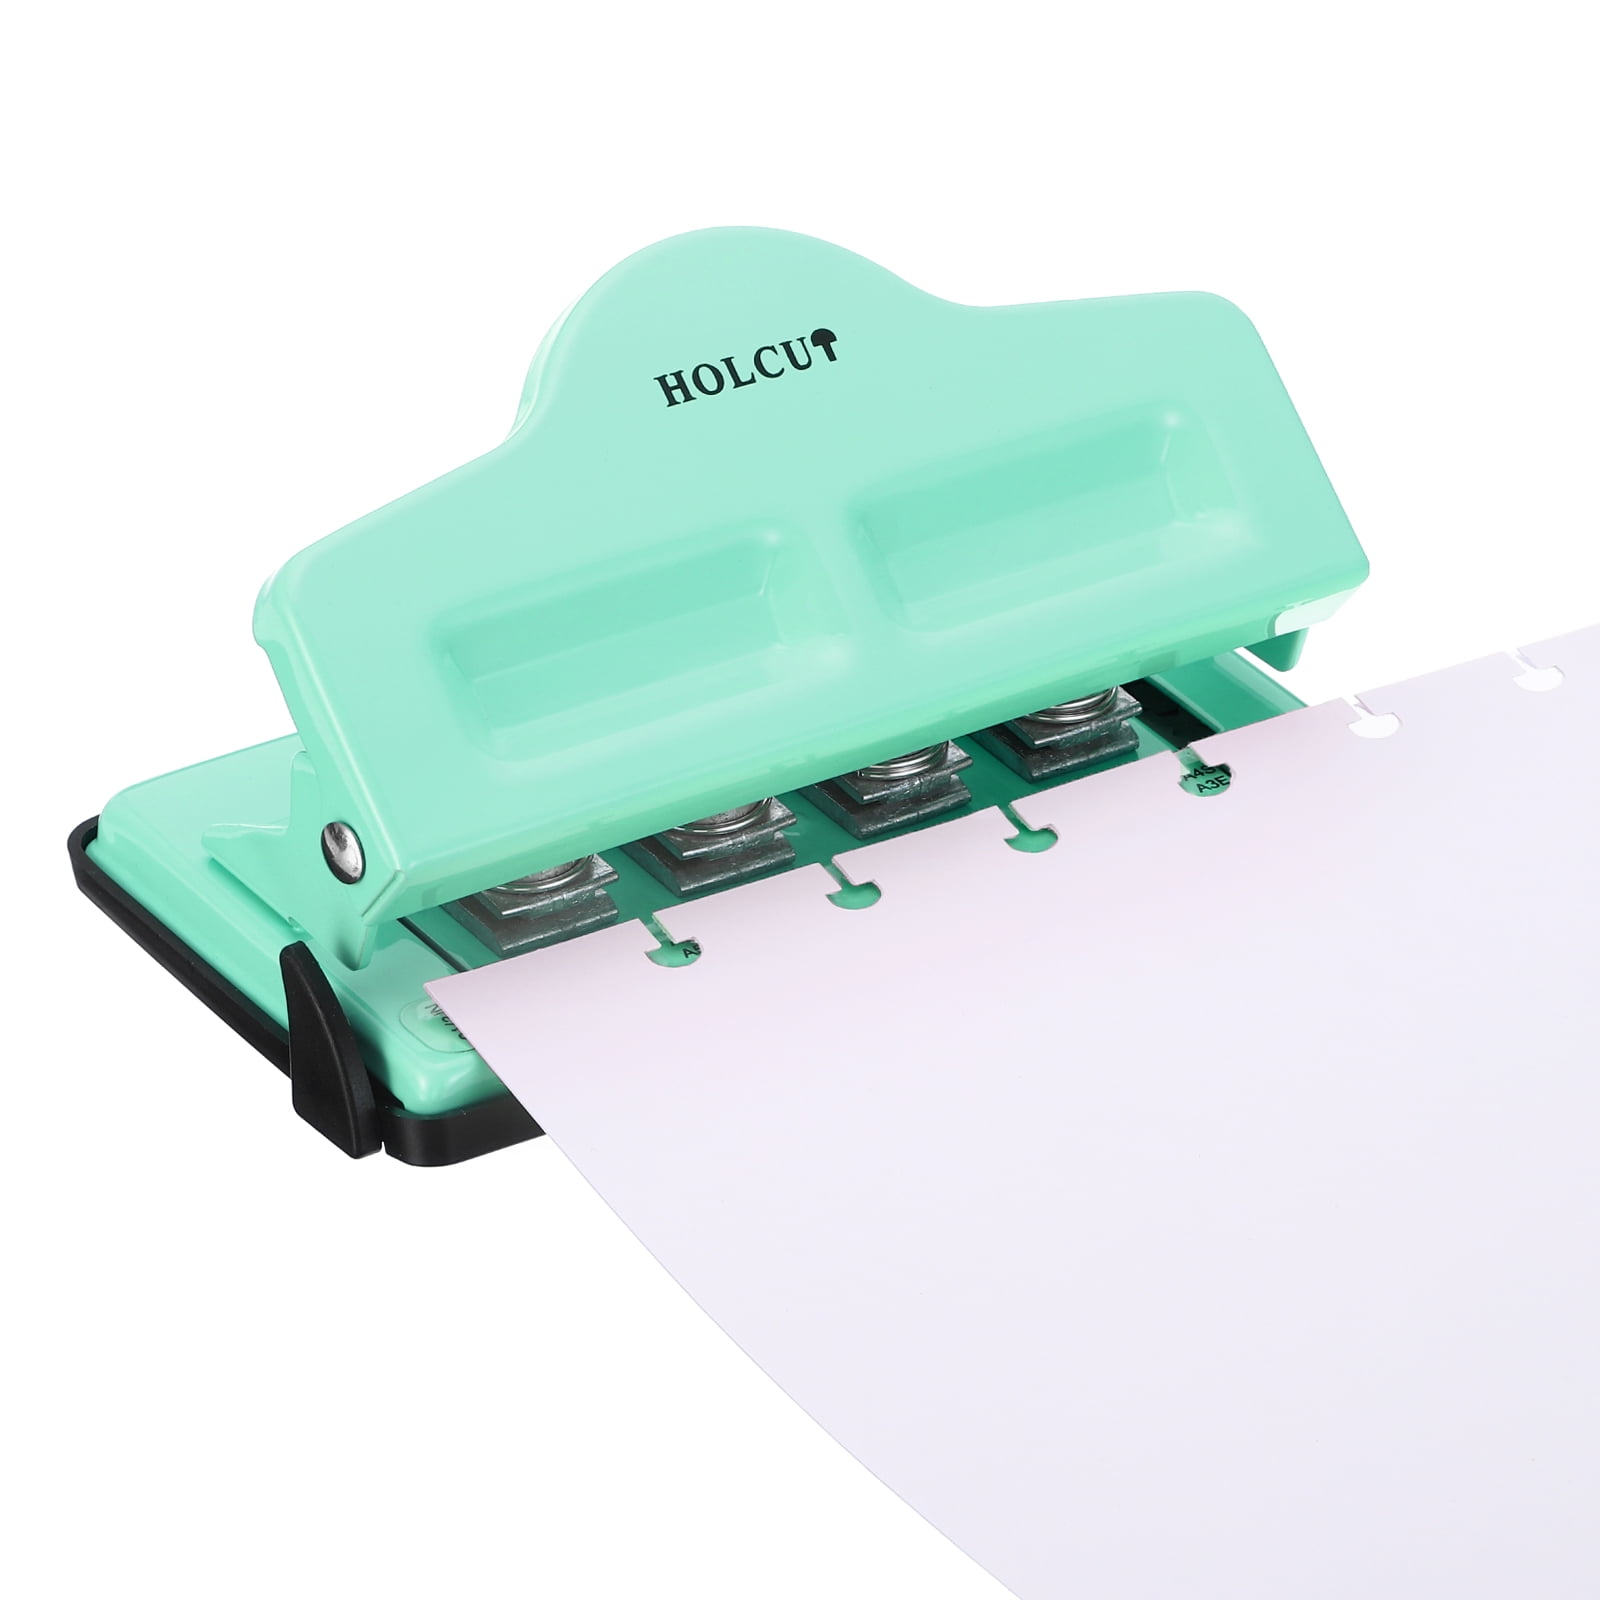 Uxcell 1/4 2 Hole Paper Punch Metal Hole Puncher 8 Sheet Punch